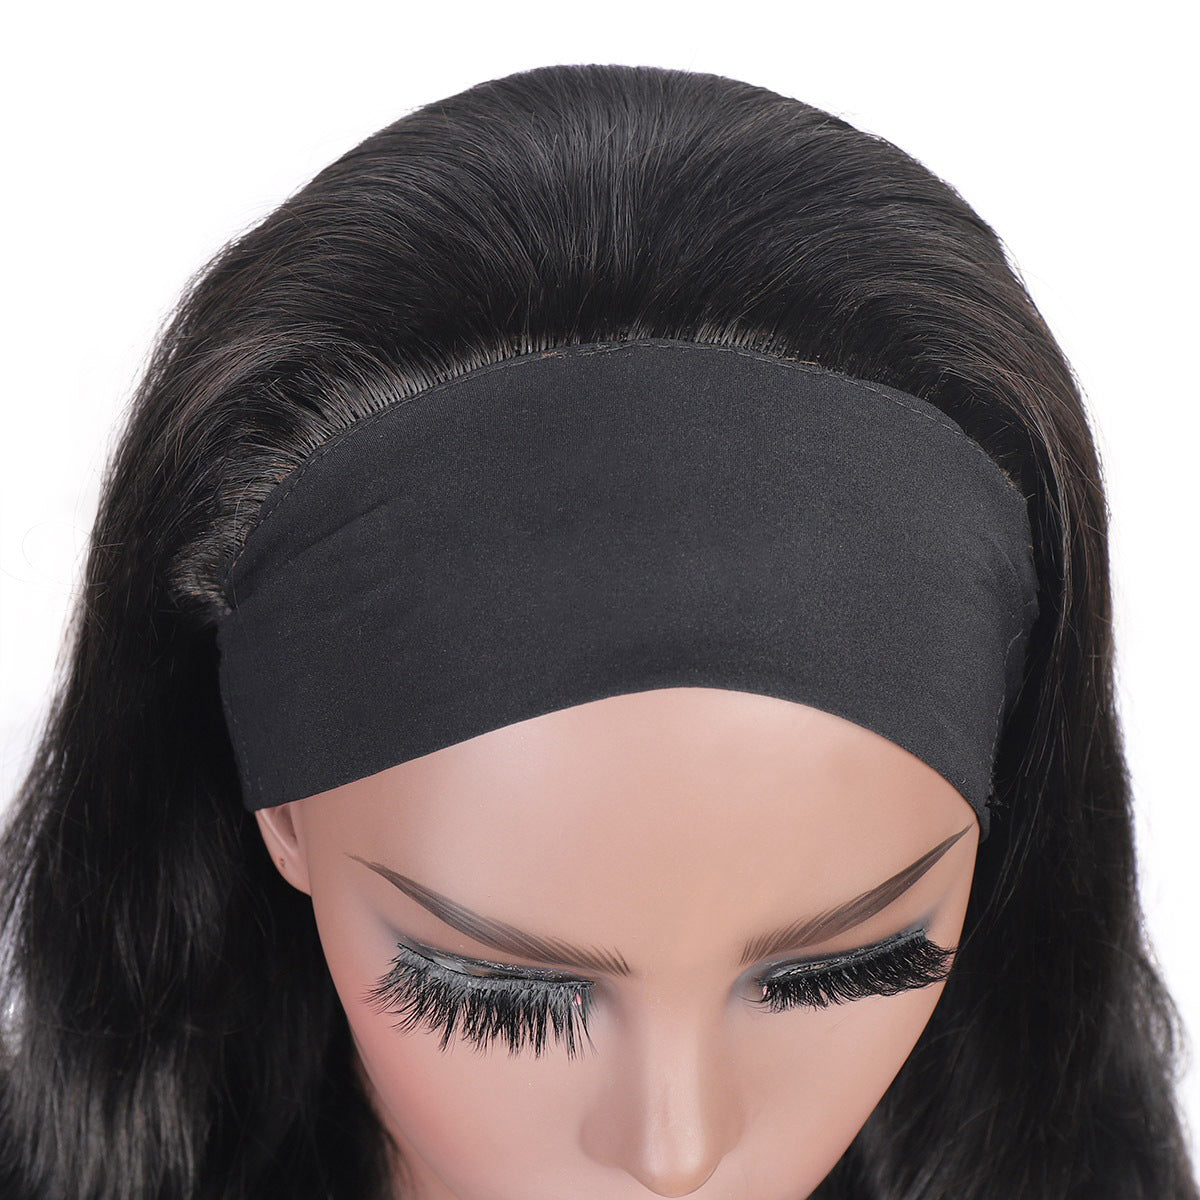 Headband Wig Body Wave 100% Human Hair Wigs Glueless None Lace Front Wigs